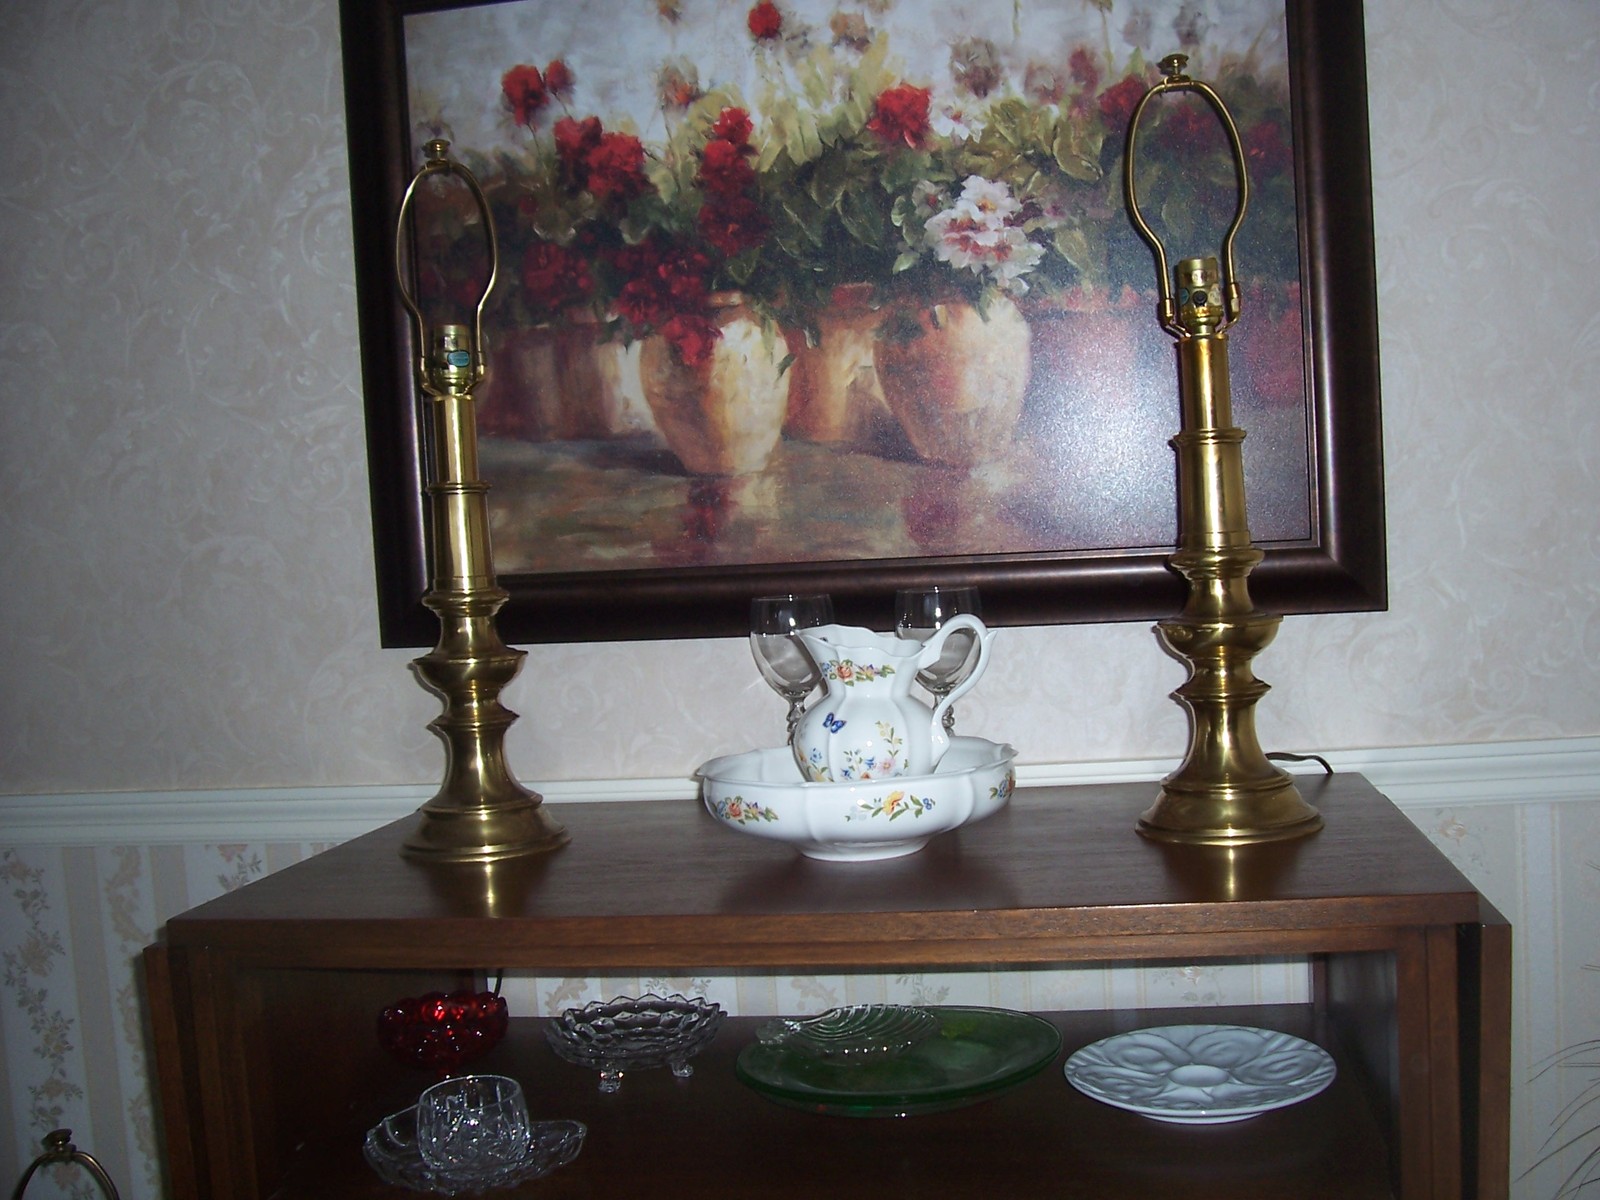 Pair of Vintage Stiffel Brass Table Lamps - Traditional Style - 3-way Switches - $130.00